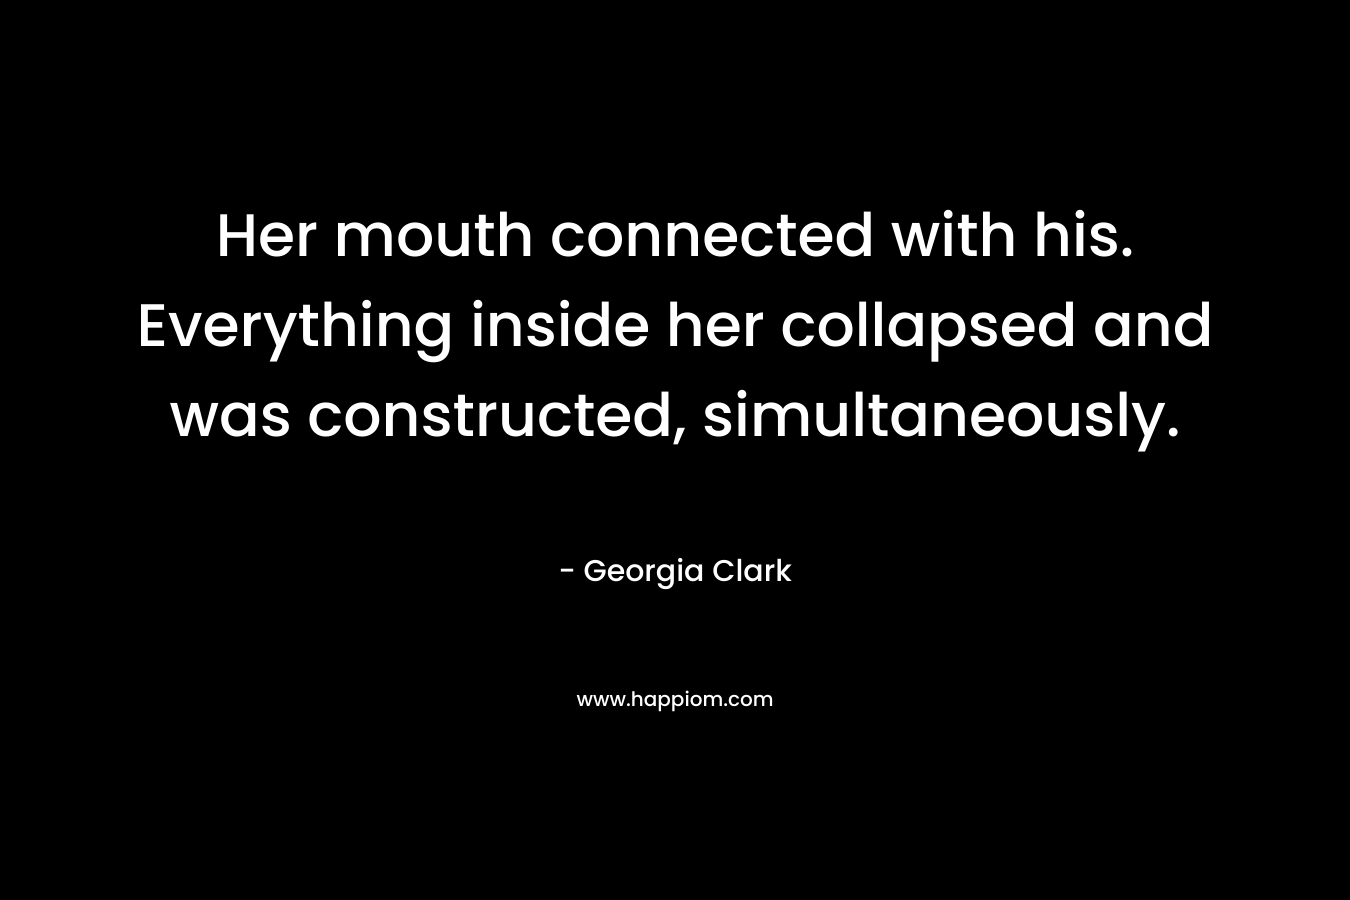 Her mouth connected with his. Everything inside her collapsed and was constructed, simultaneously.